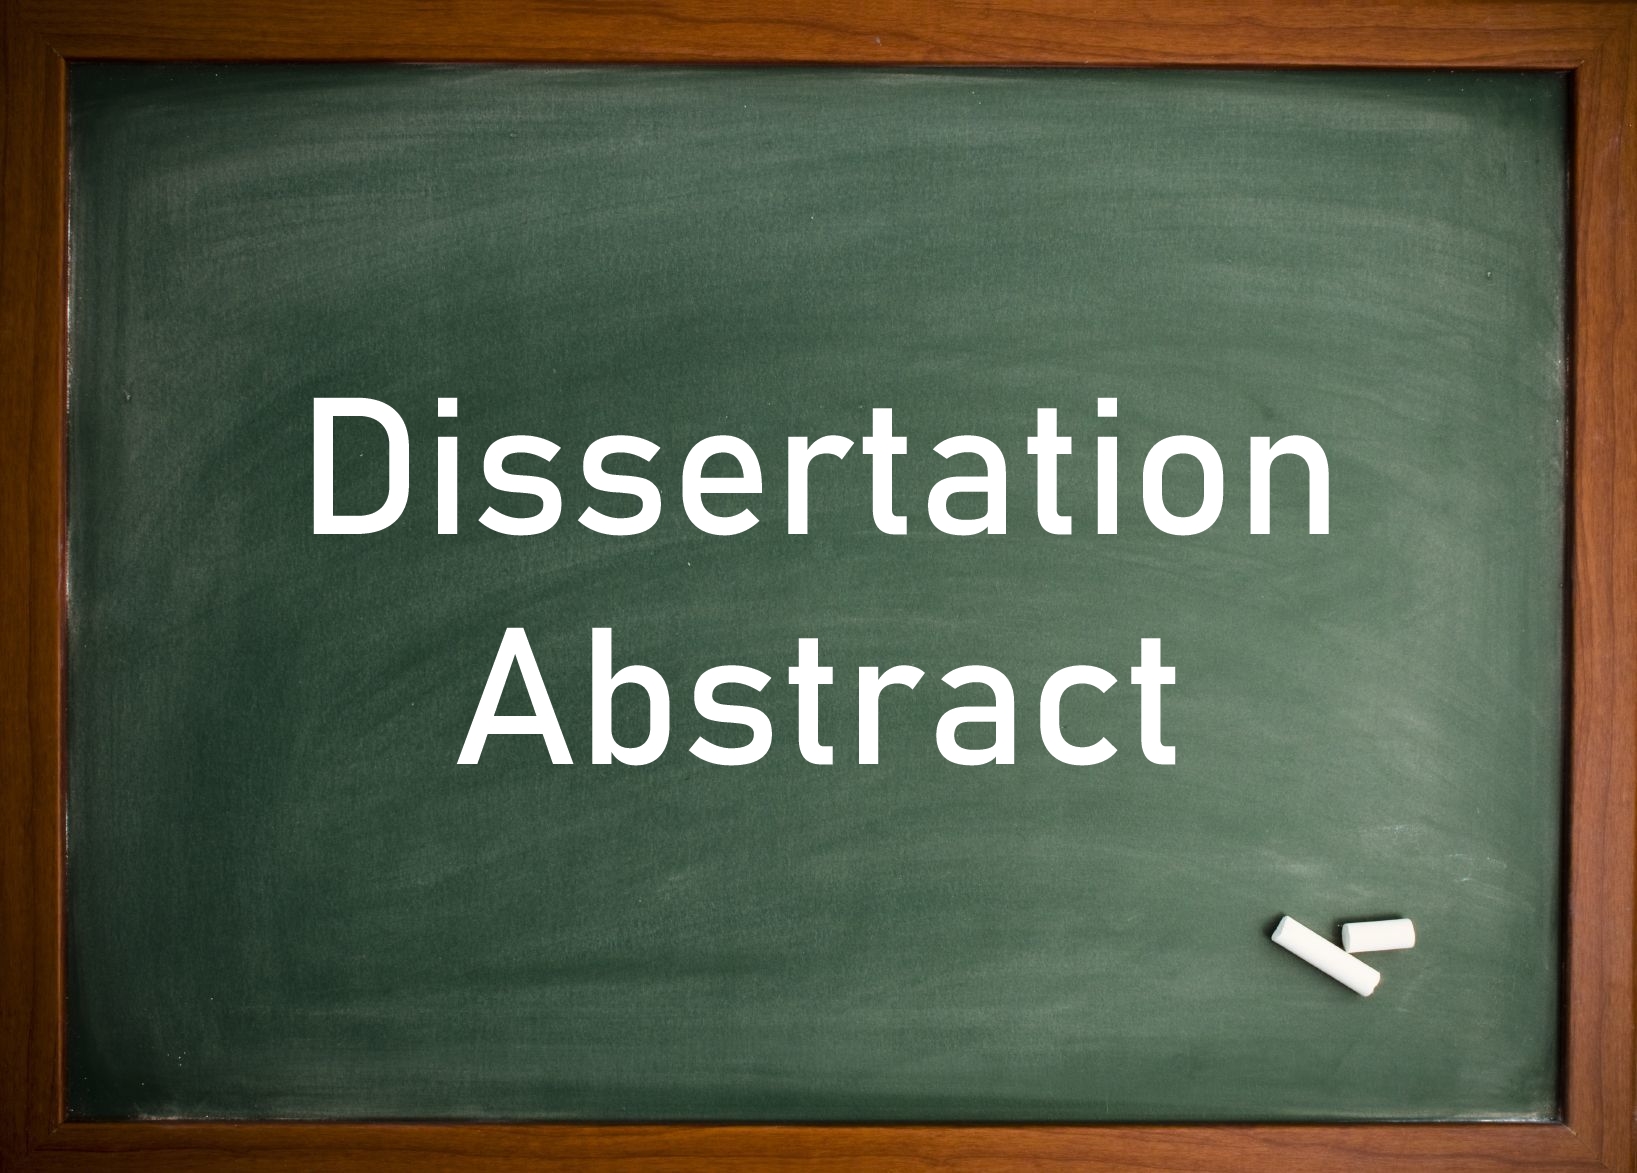 abstract for dissertation proposal